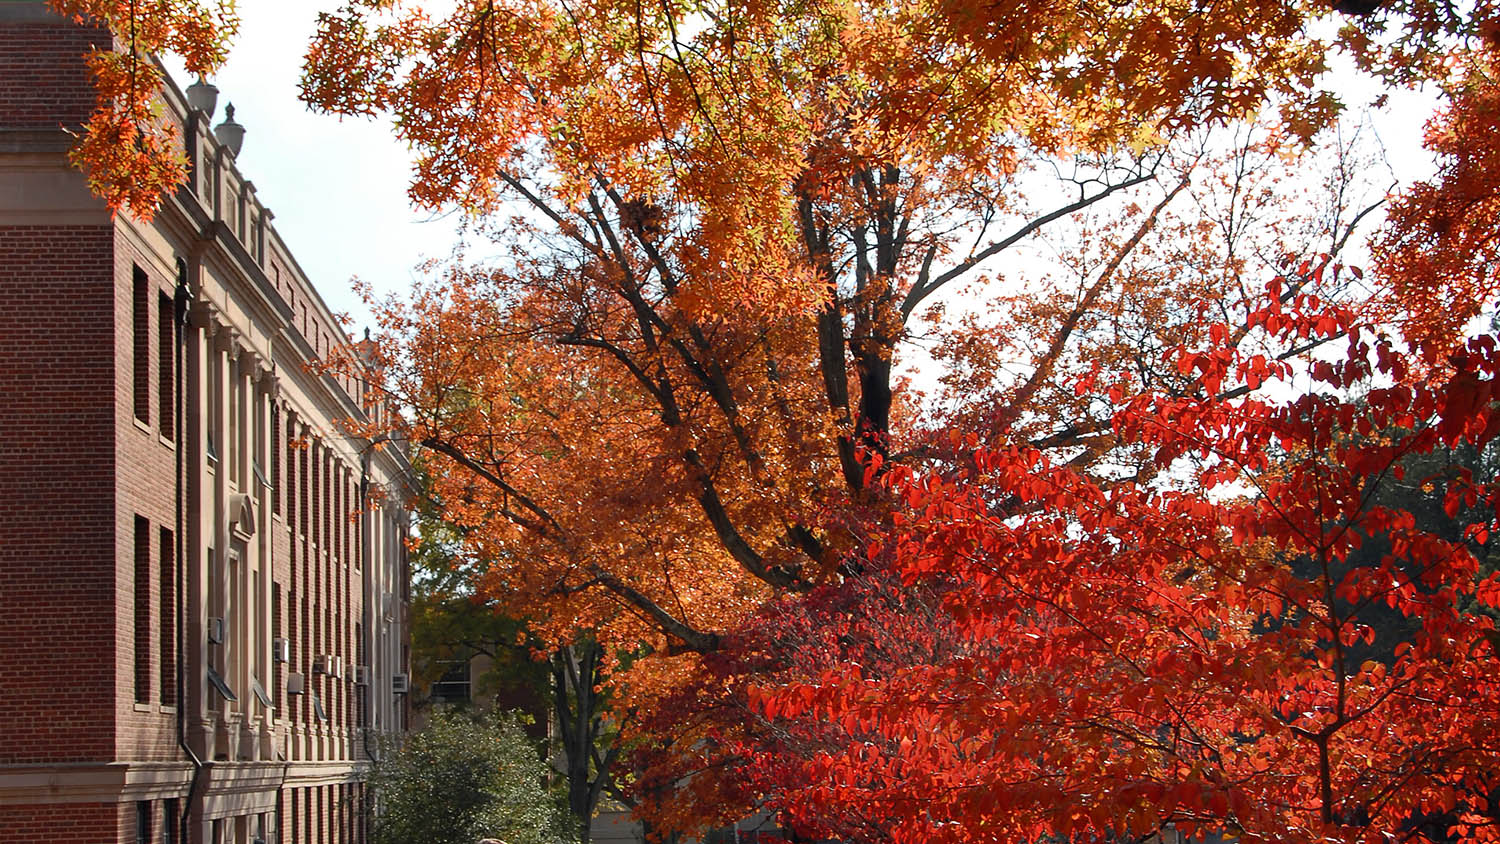 Withers Hall next to autumn leaves